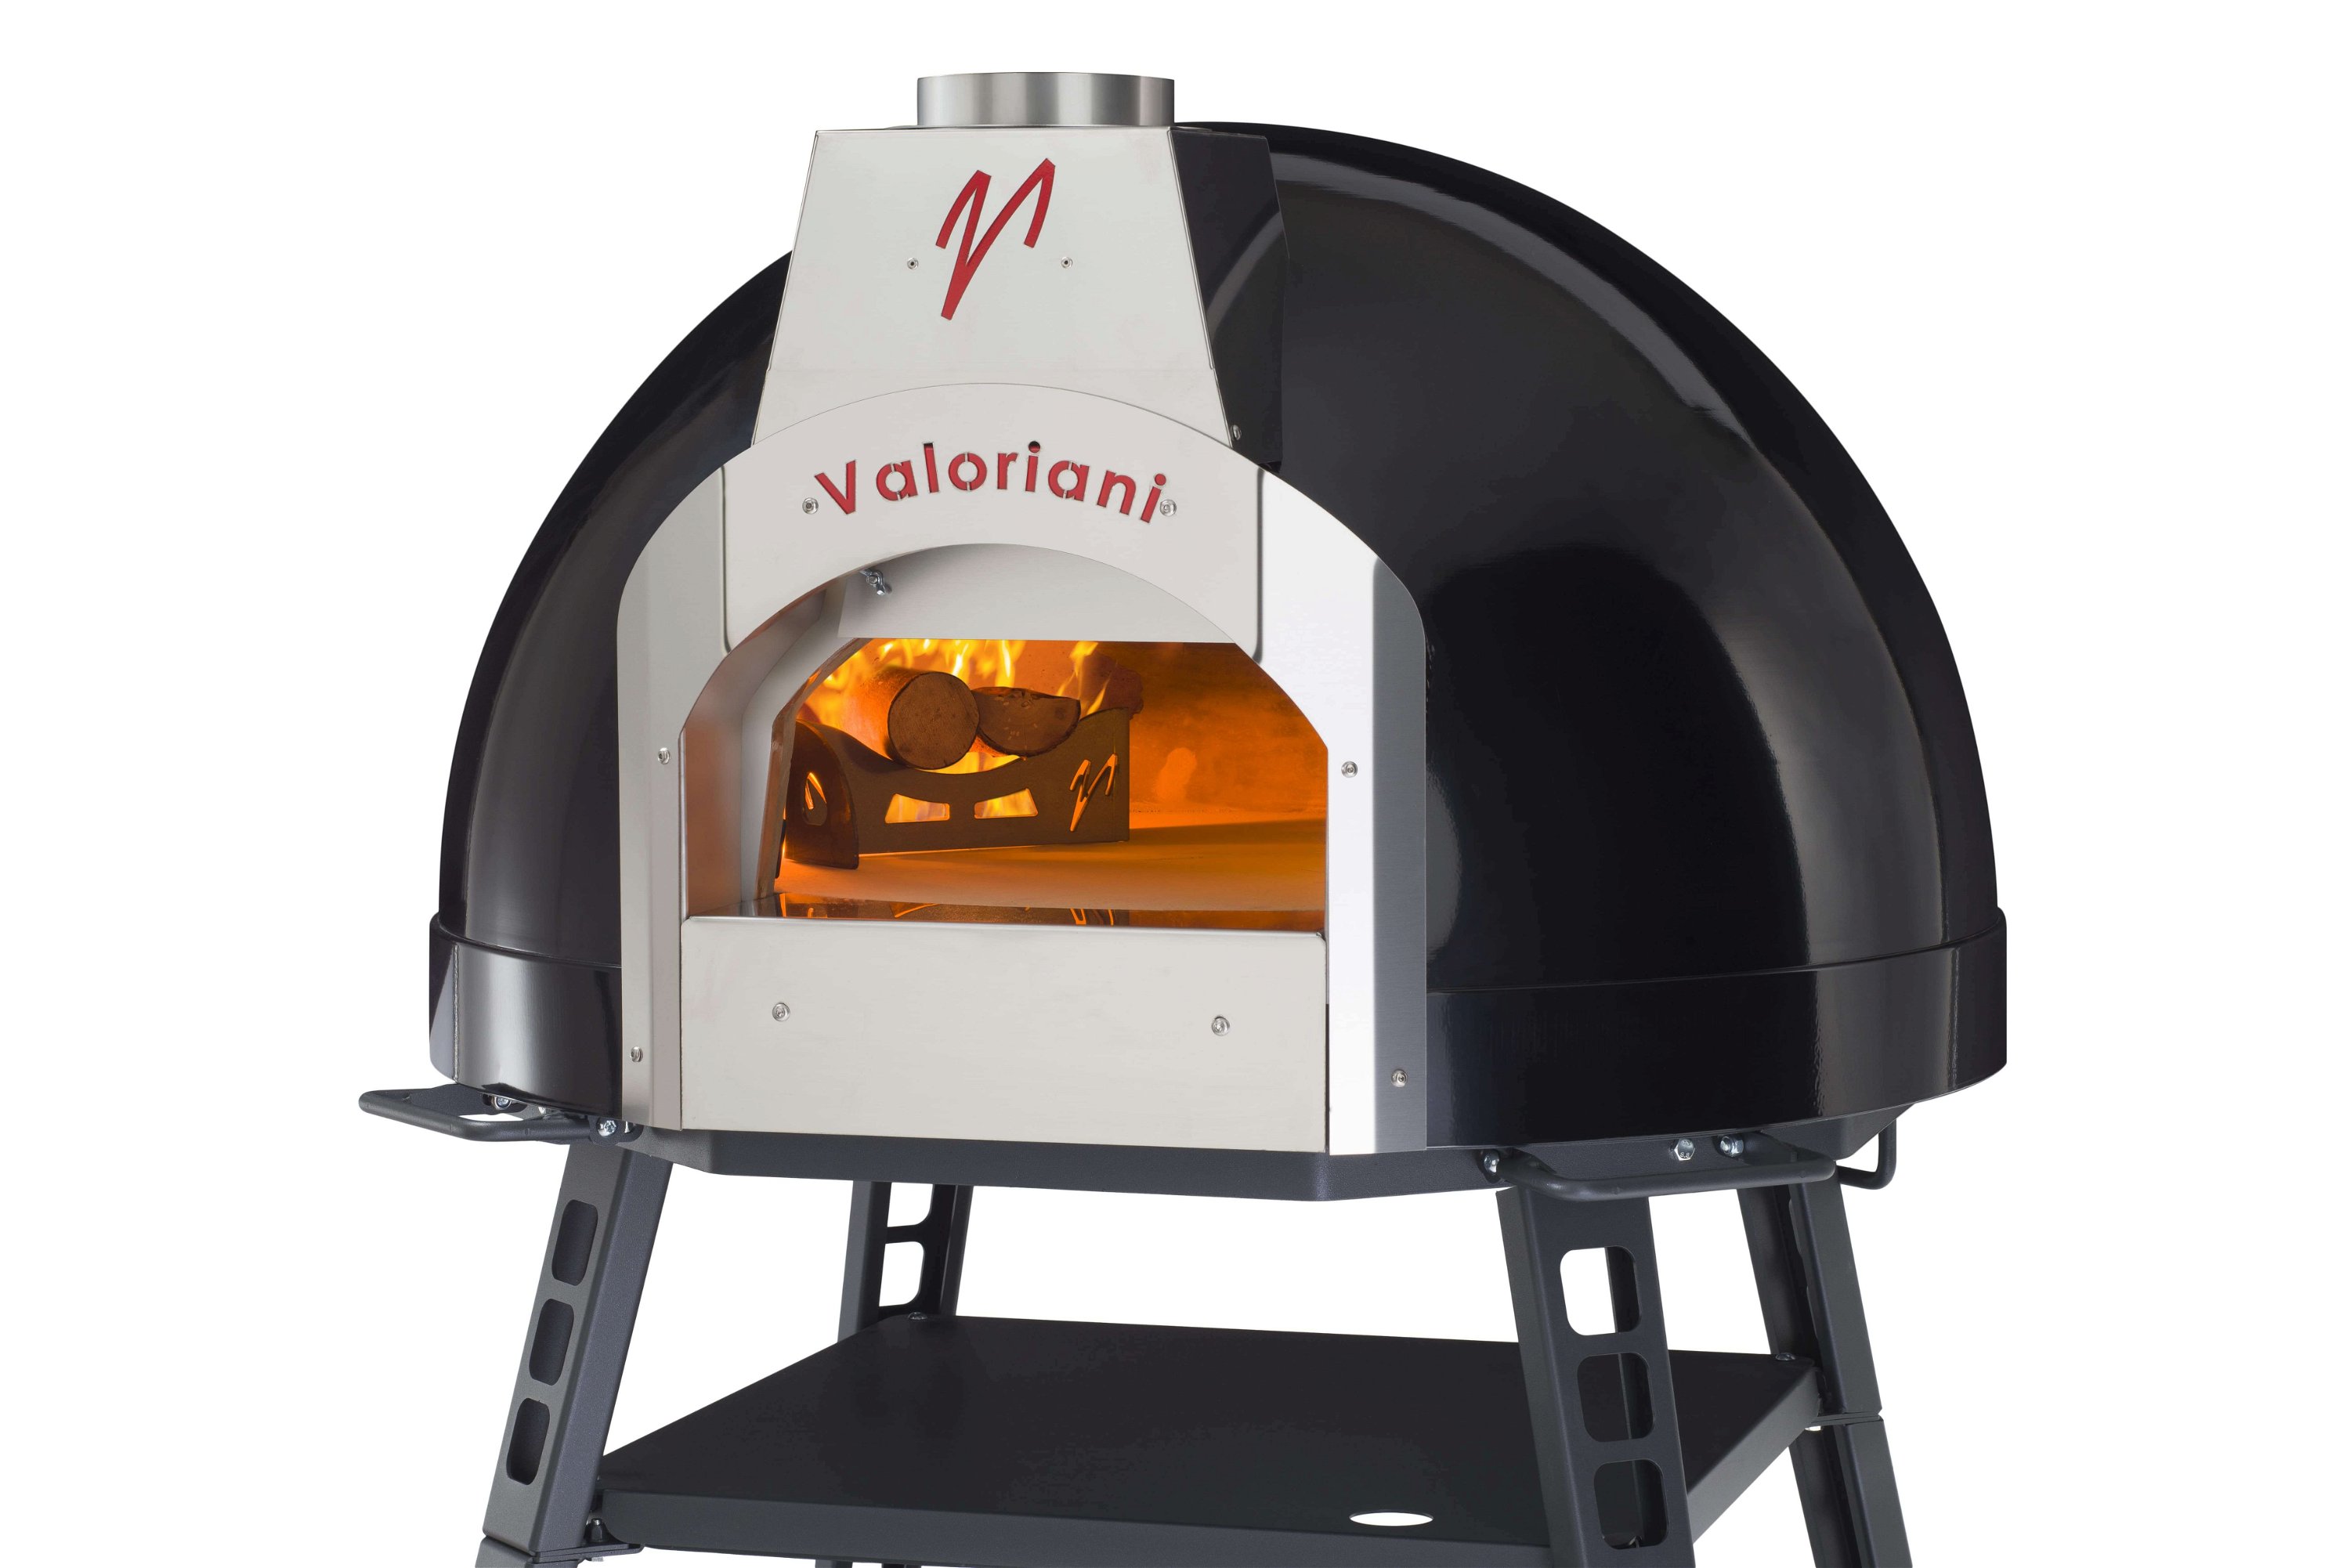 Valoriani Baby: pizza oven with wood firing, 75cm diameter, incl. 1.base, black